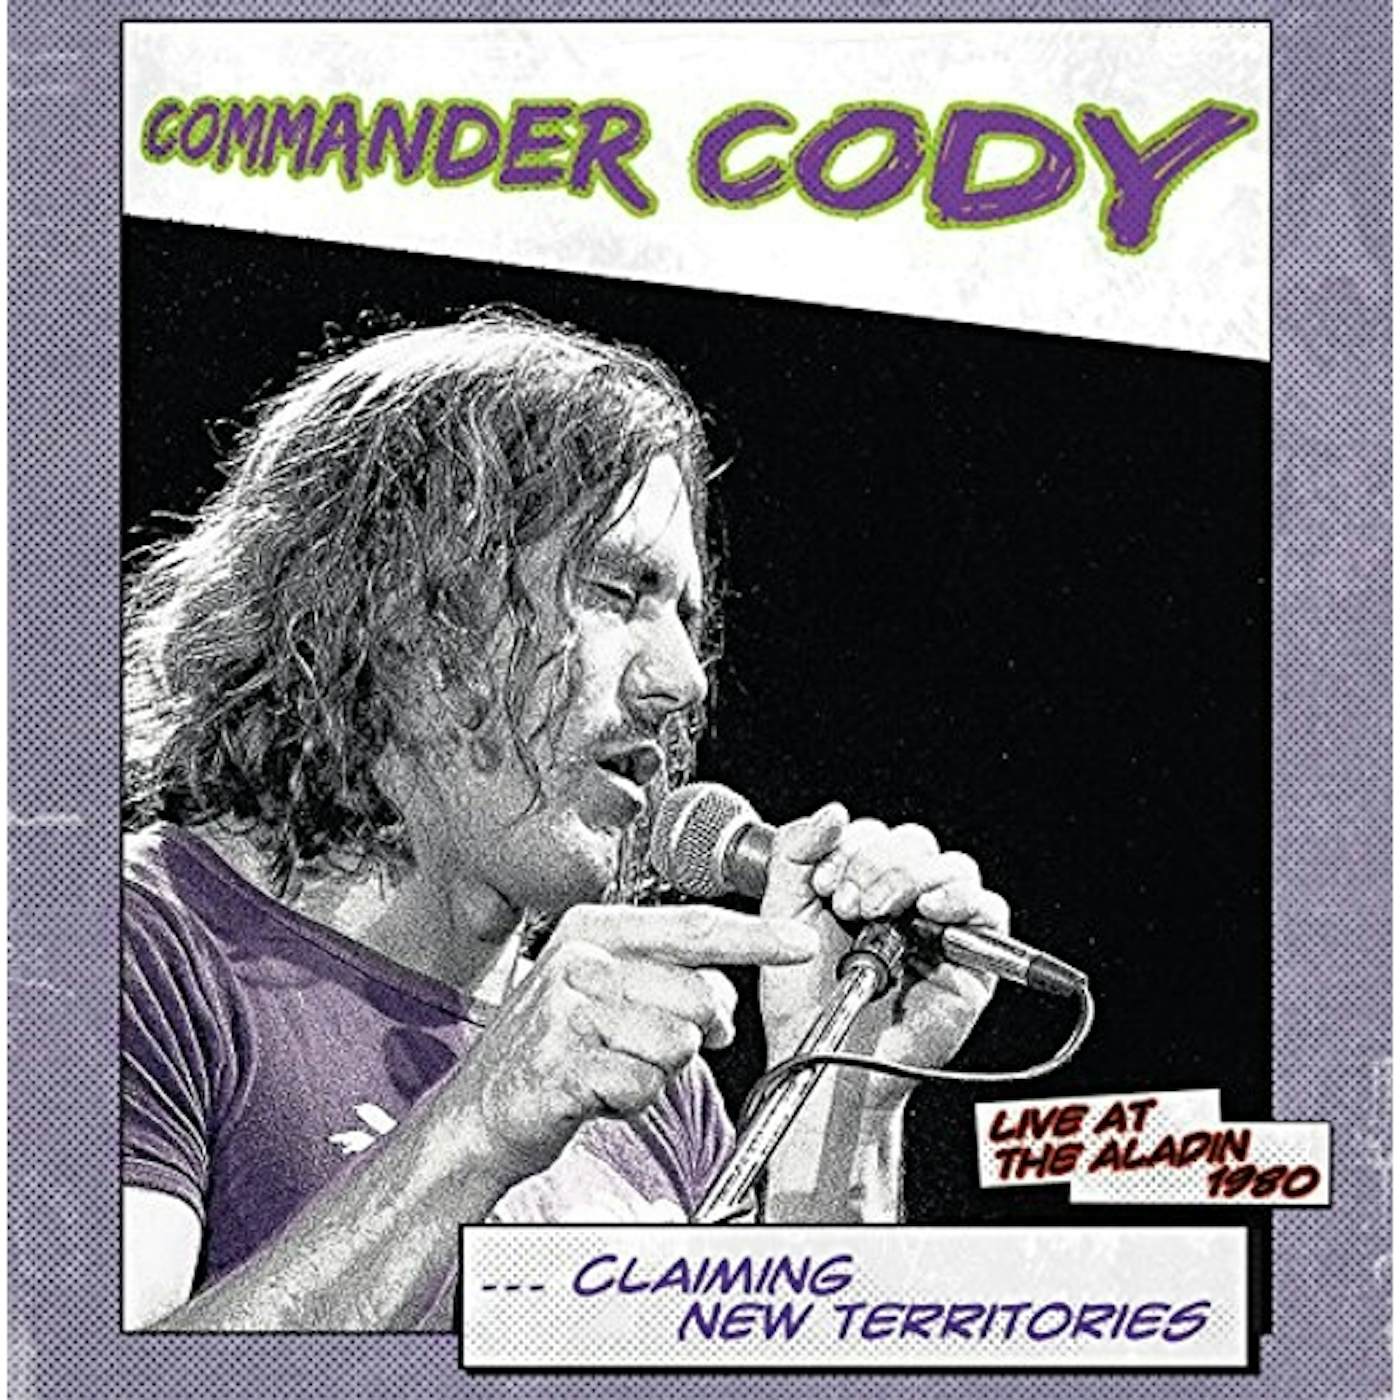 Commander Cody CLAIMING NEW TERRITORIES: LIVE AT THE ALADIN 1980 Vinyl Record